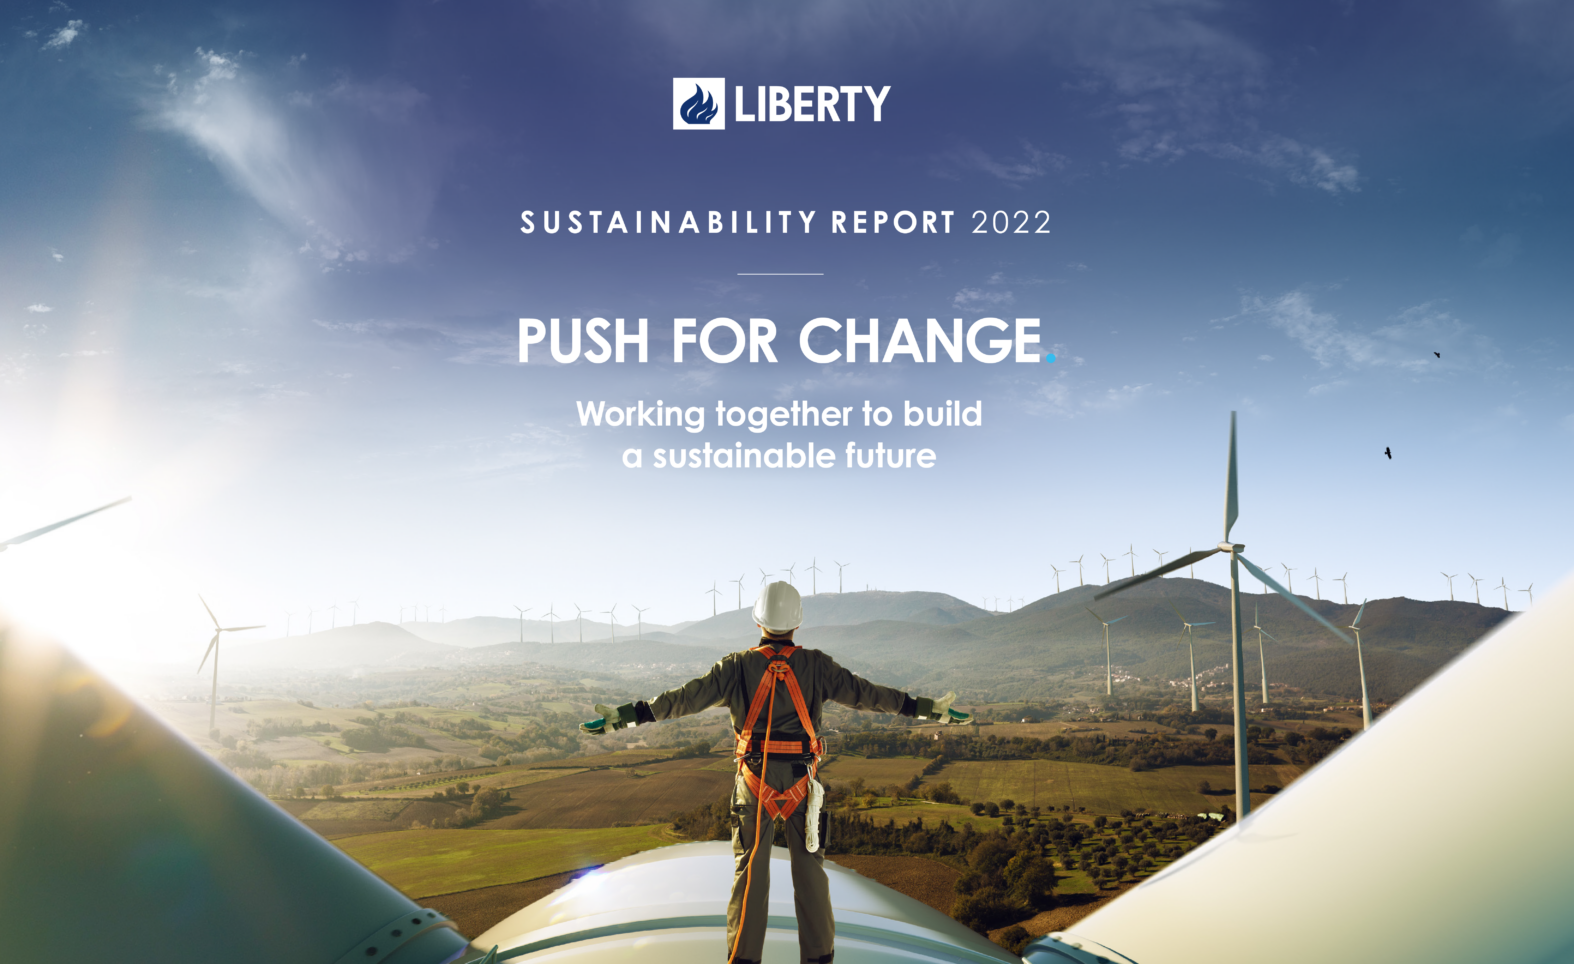 Sustainability Report – a special podcast